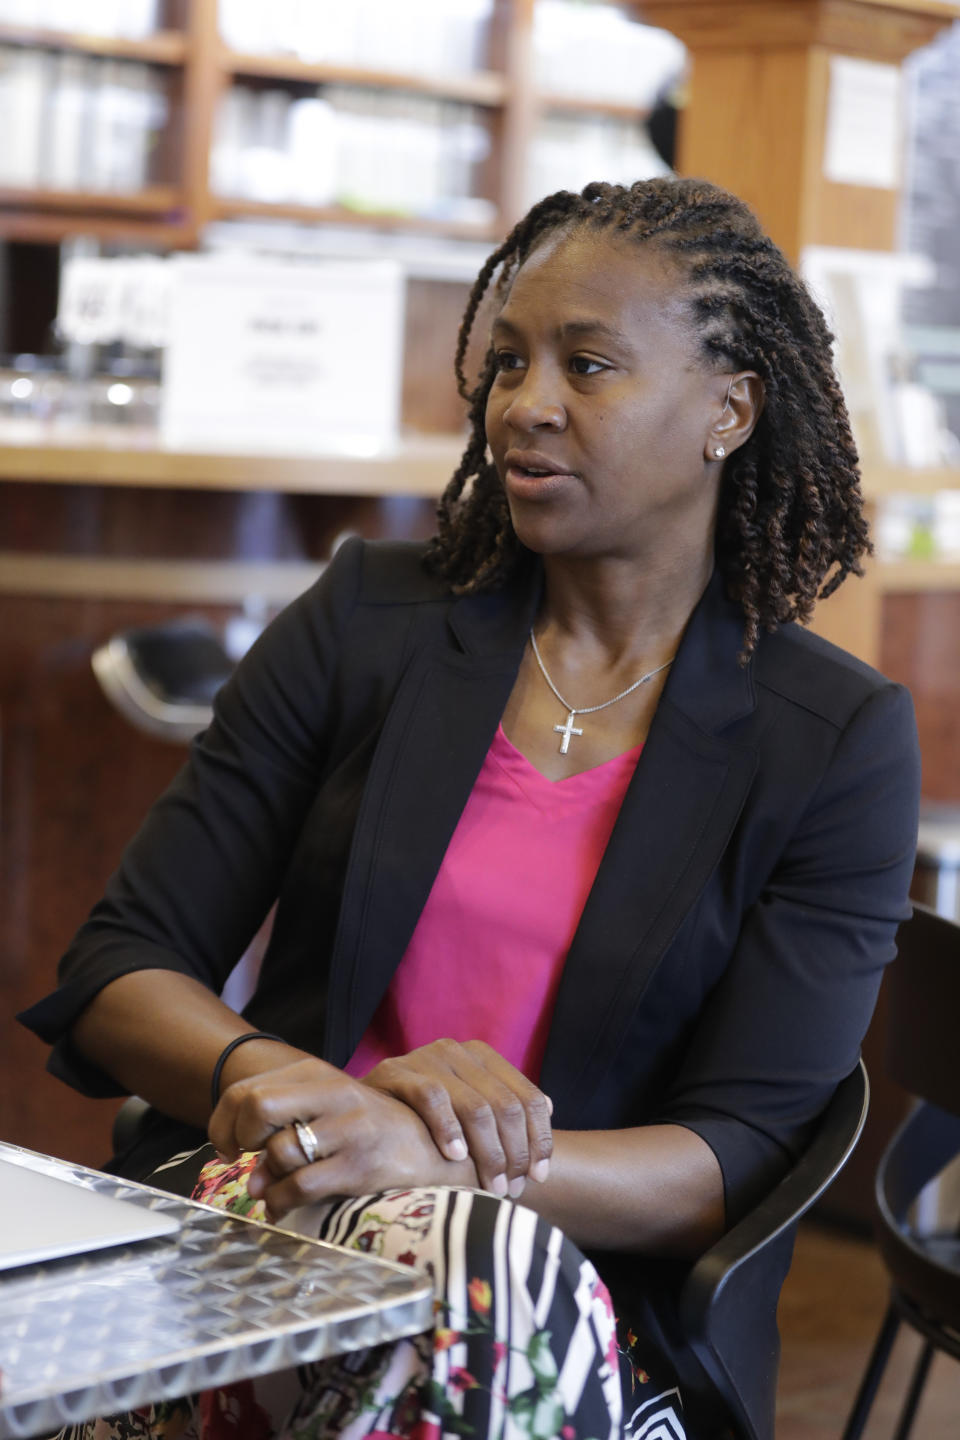 Tamika Catchings meets with Rod Haywood at Tea's Me Cafe, Wednesday, June 26, 2019, in Indianapolis. Nearly three years since Catchings played her final basketball game, the 39-year-old former star is establishing herself in a variety of new roles: Business owner and front-office executive, not to mention being a contestant on NBC’s popular “American Ninja Warrior.” (AP Photo/Darron Cummings)